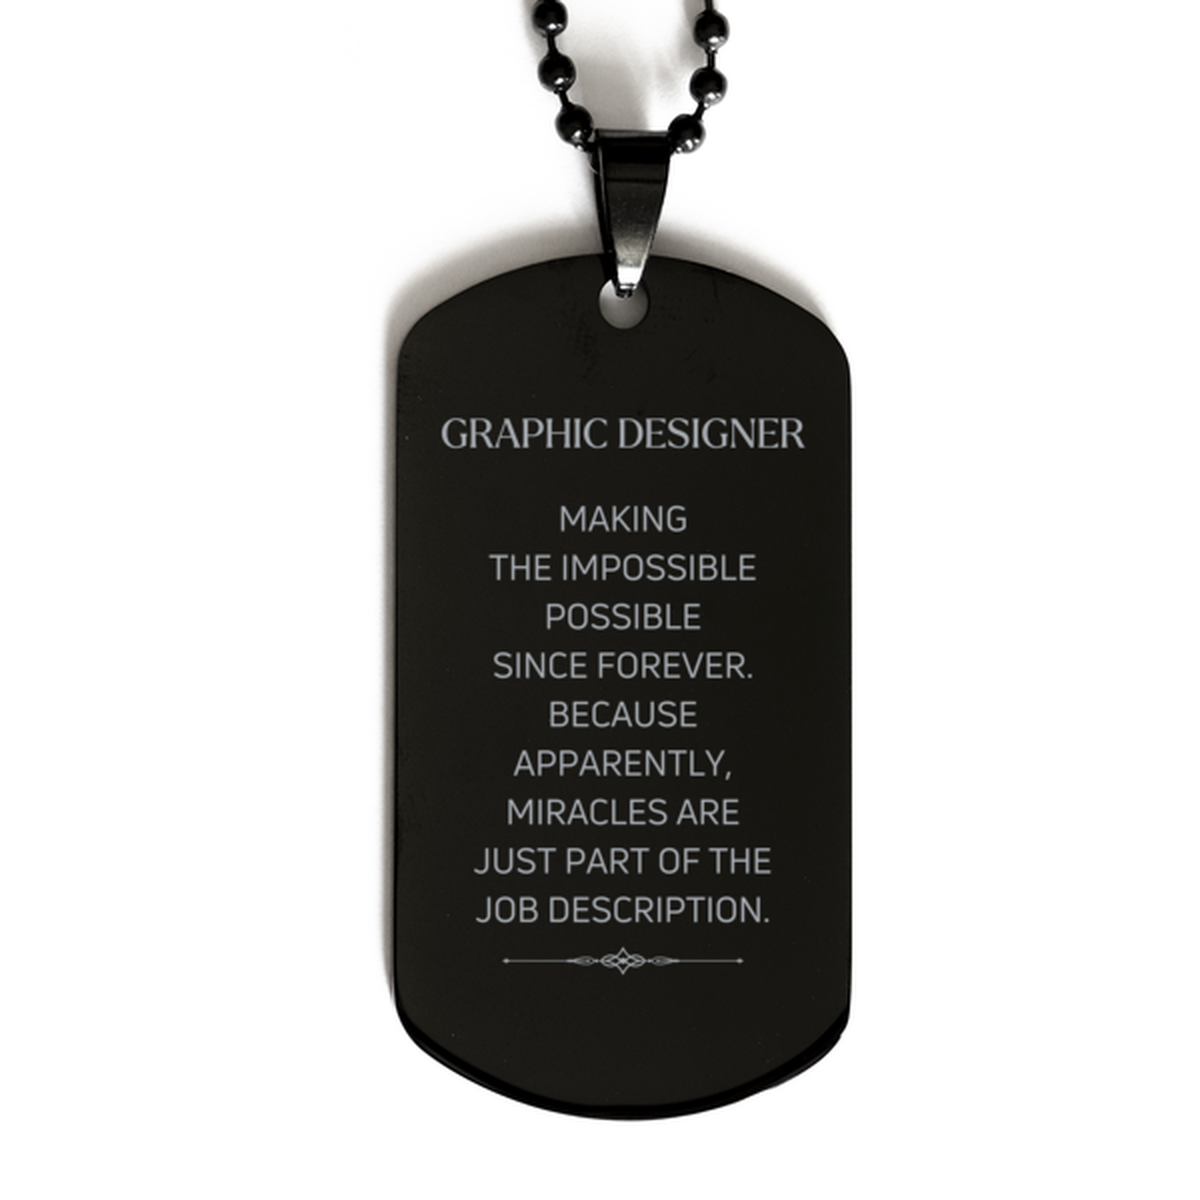 Funny Graphic Designer Gifts, Miracles are just part of the job description, Inspirational Birthday Black Dog Tag For Graphic Designer, Men, Women, Coworkers, Friends, Boss